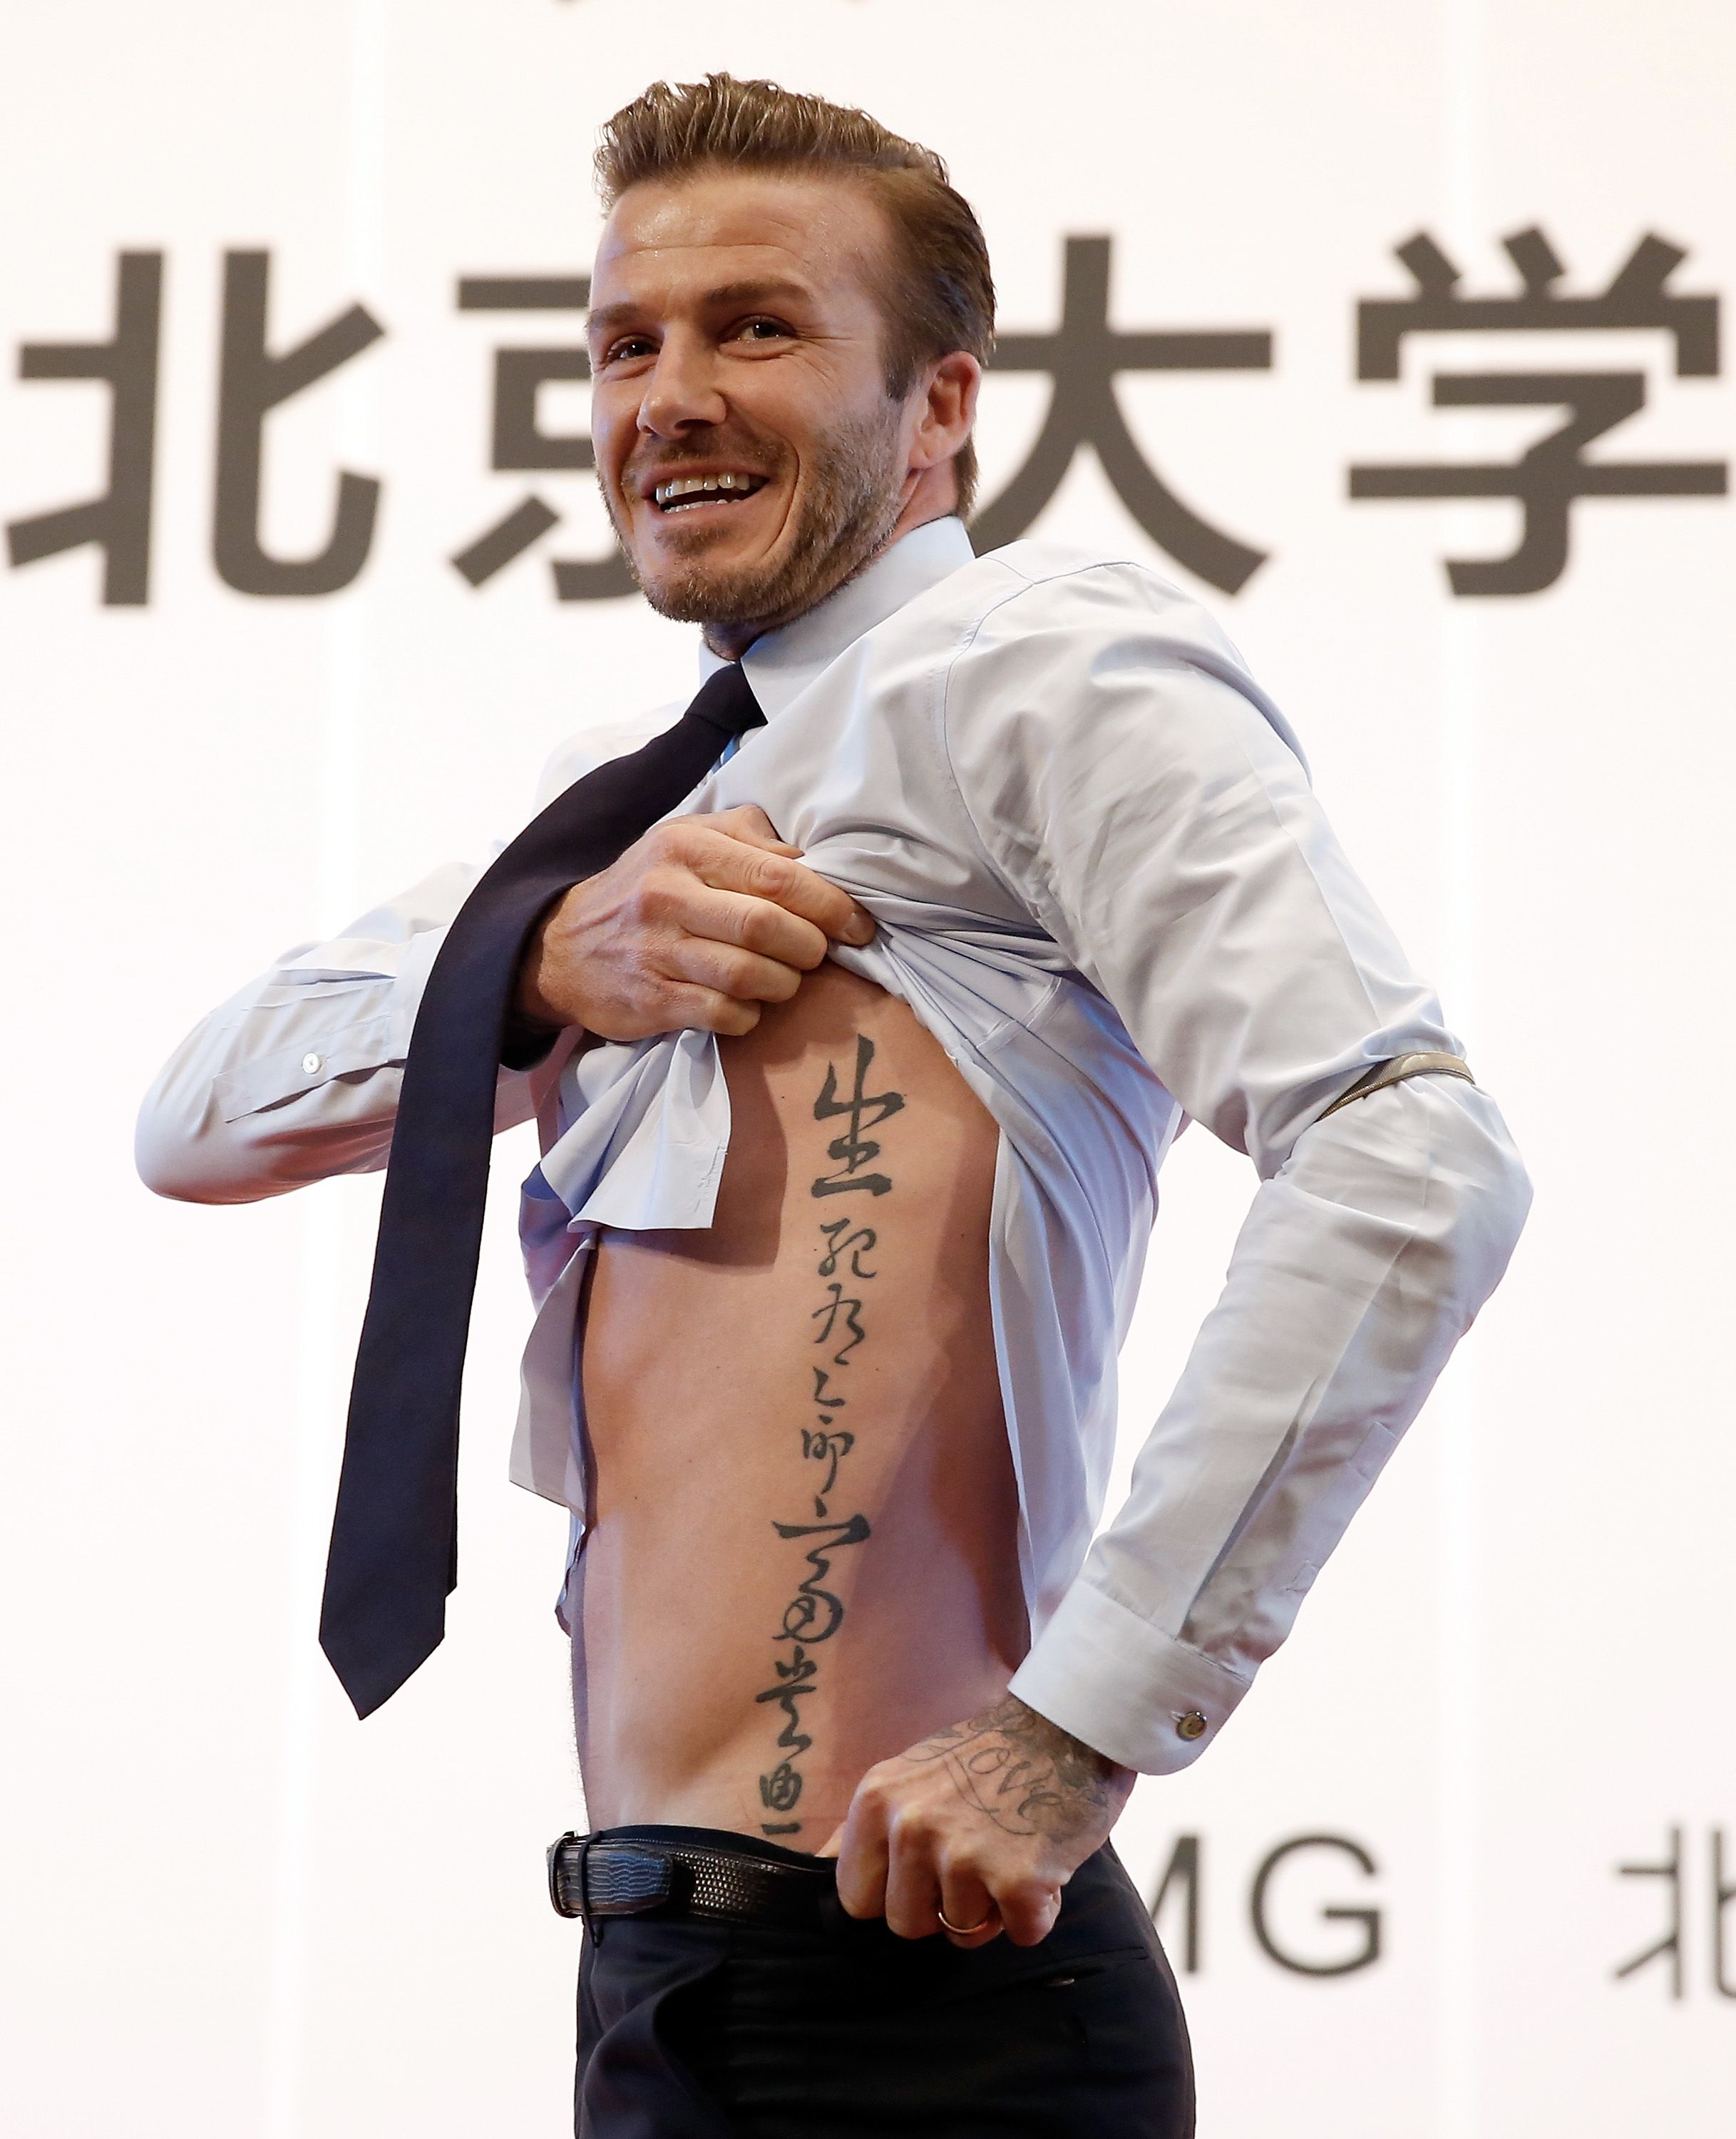 What are the biggest mistakes ever made in a tattoo of Chinese characters?  - Quora